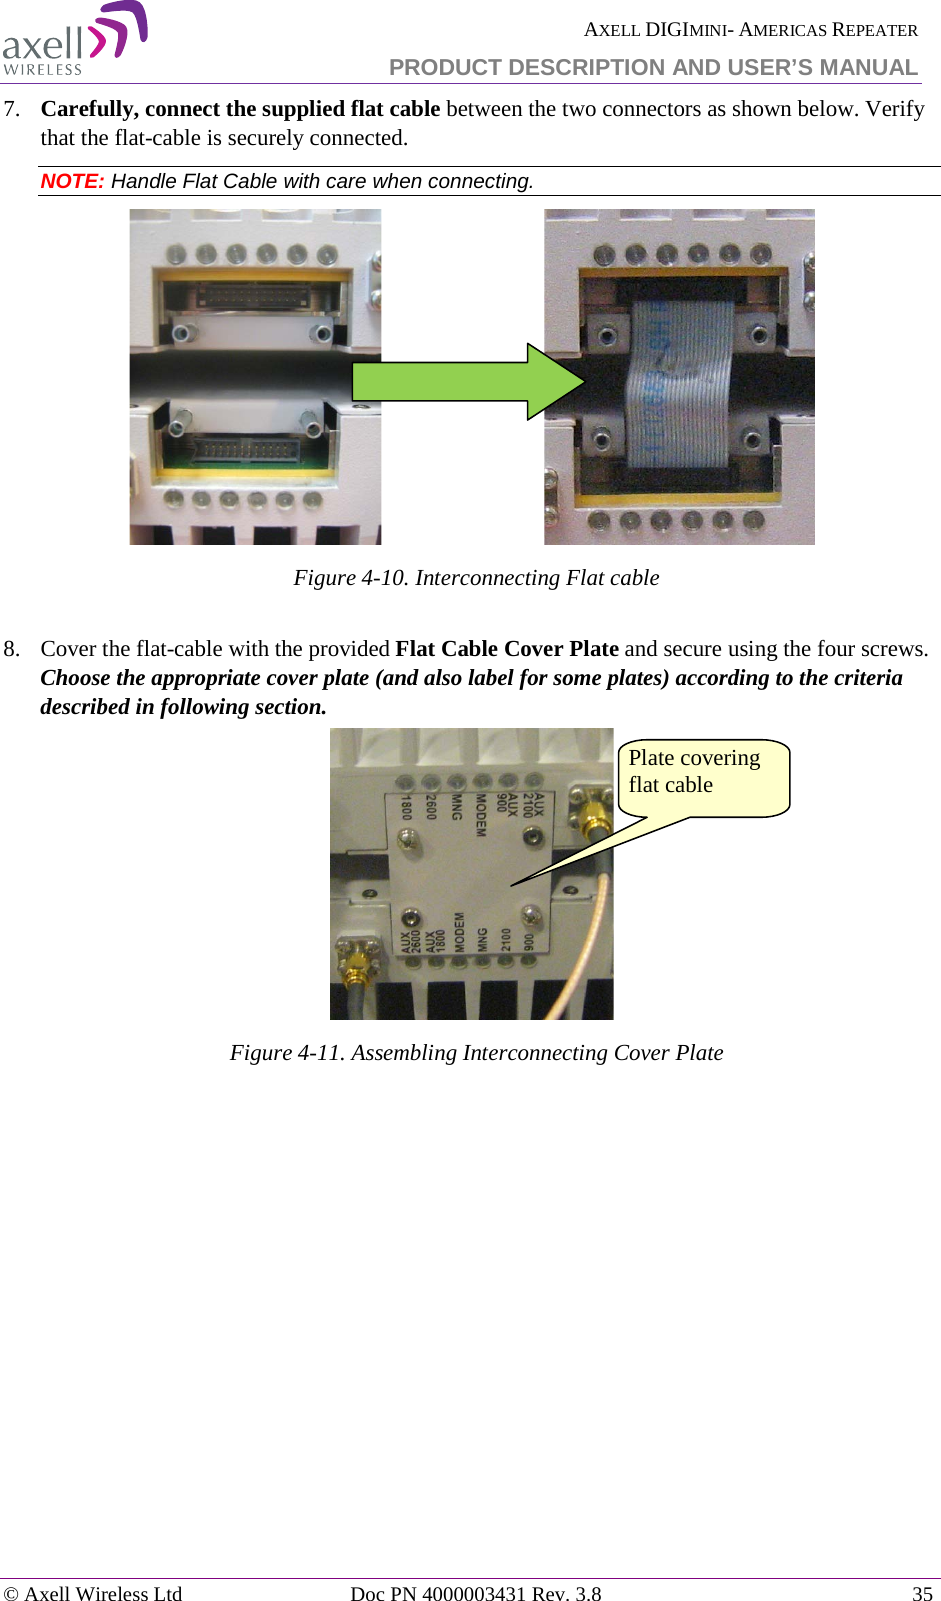  AXELL DIGIMINI- AMERICAS REPEATER PRODUCT DESCRIPTION AND USER’S MANUAL © Axell Wireless Ltd Doc PN 4000003431 Rev. 3.8 35  7.  Carefully, connect the supplied flat cable between the two connectors as shown below. Verify that the flat-cable is securely connected. NOTE: Handle Flat Cable with care when connecting.                               Figure  4-10. Interconnecting Flat cable  8.  Cover the flat-cable with the provided Flat Cable Cover Plate and secure using the four screws. Choose the appropriate cover plate (and also label for some plates) according to the criteria described in following section.  Figure  4-11. Assembling Interconnecting Cover Plate  Plate covering flat cable 